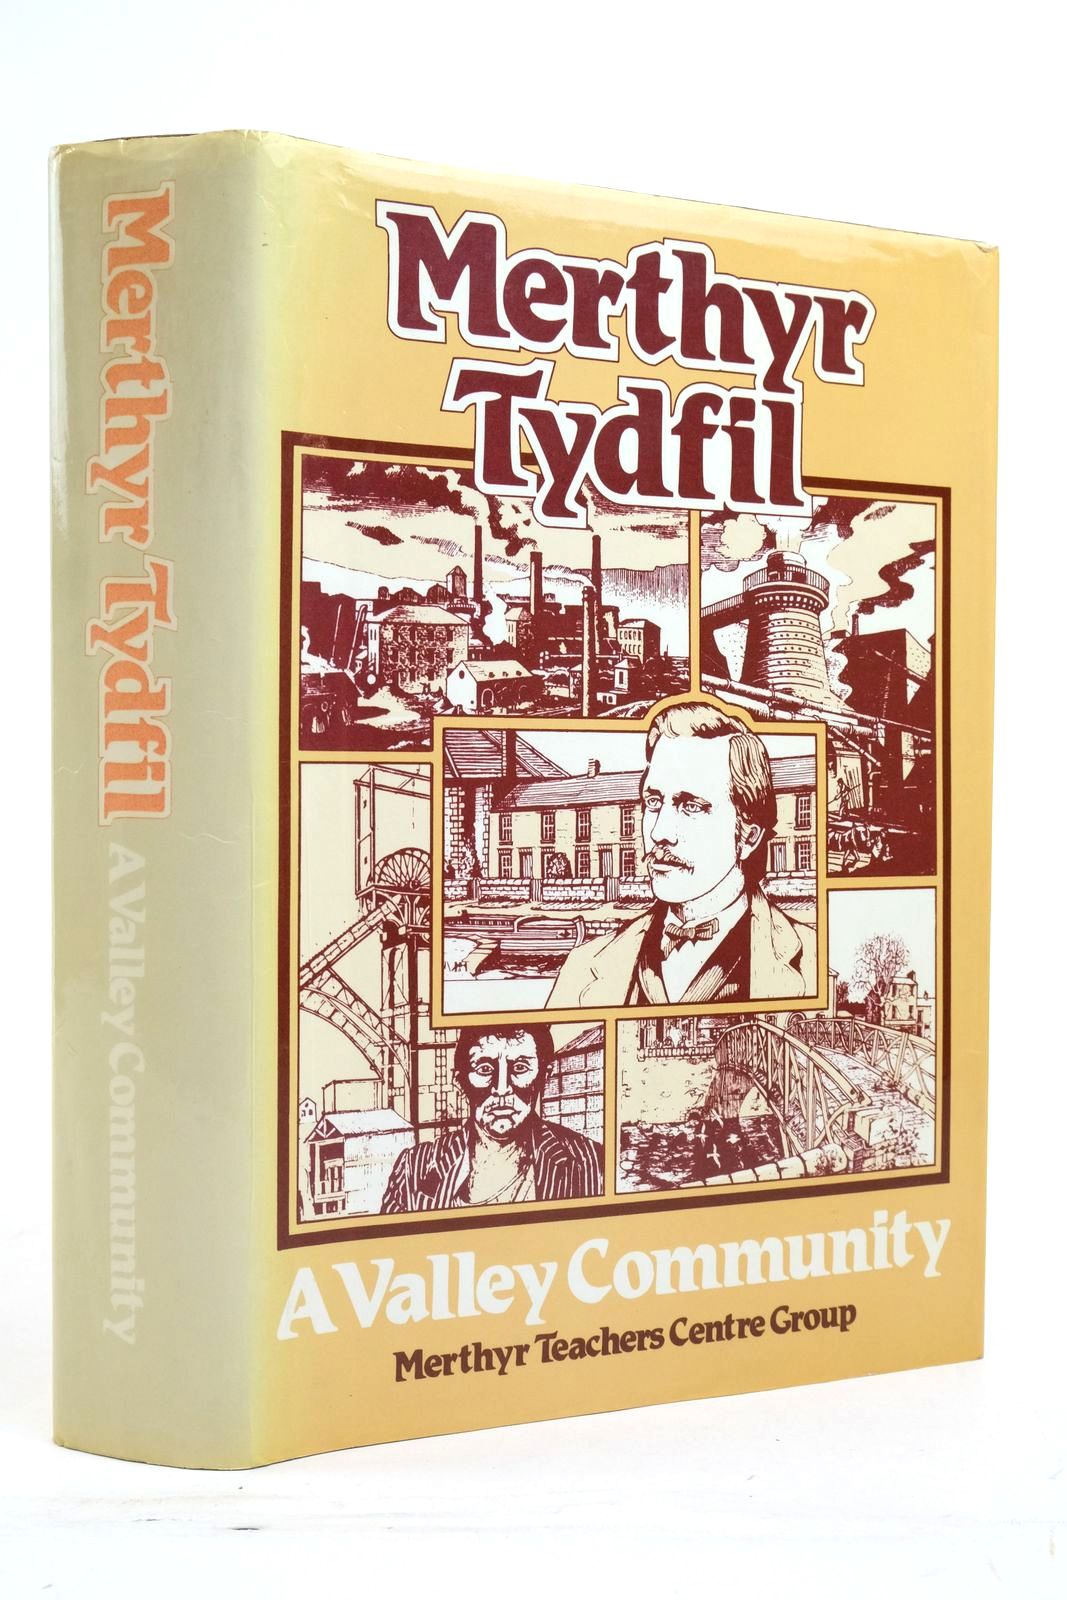 Photo of MERTHYR TYDFIL A VALLEY COMMUNITY published by The Merthyr Teachers Centre Group (STOCK CODE: 2136787)  for sale by Stella & Rose's Books